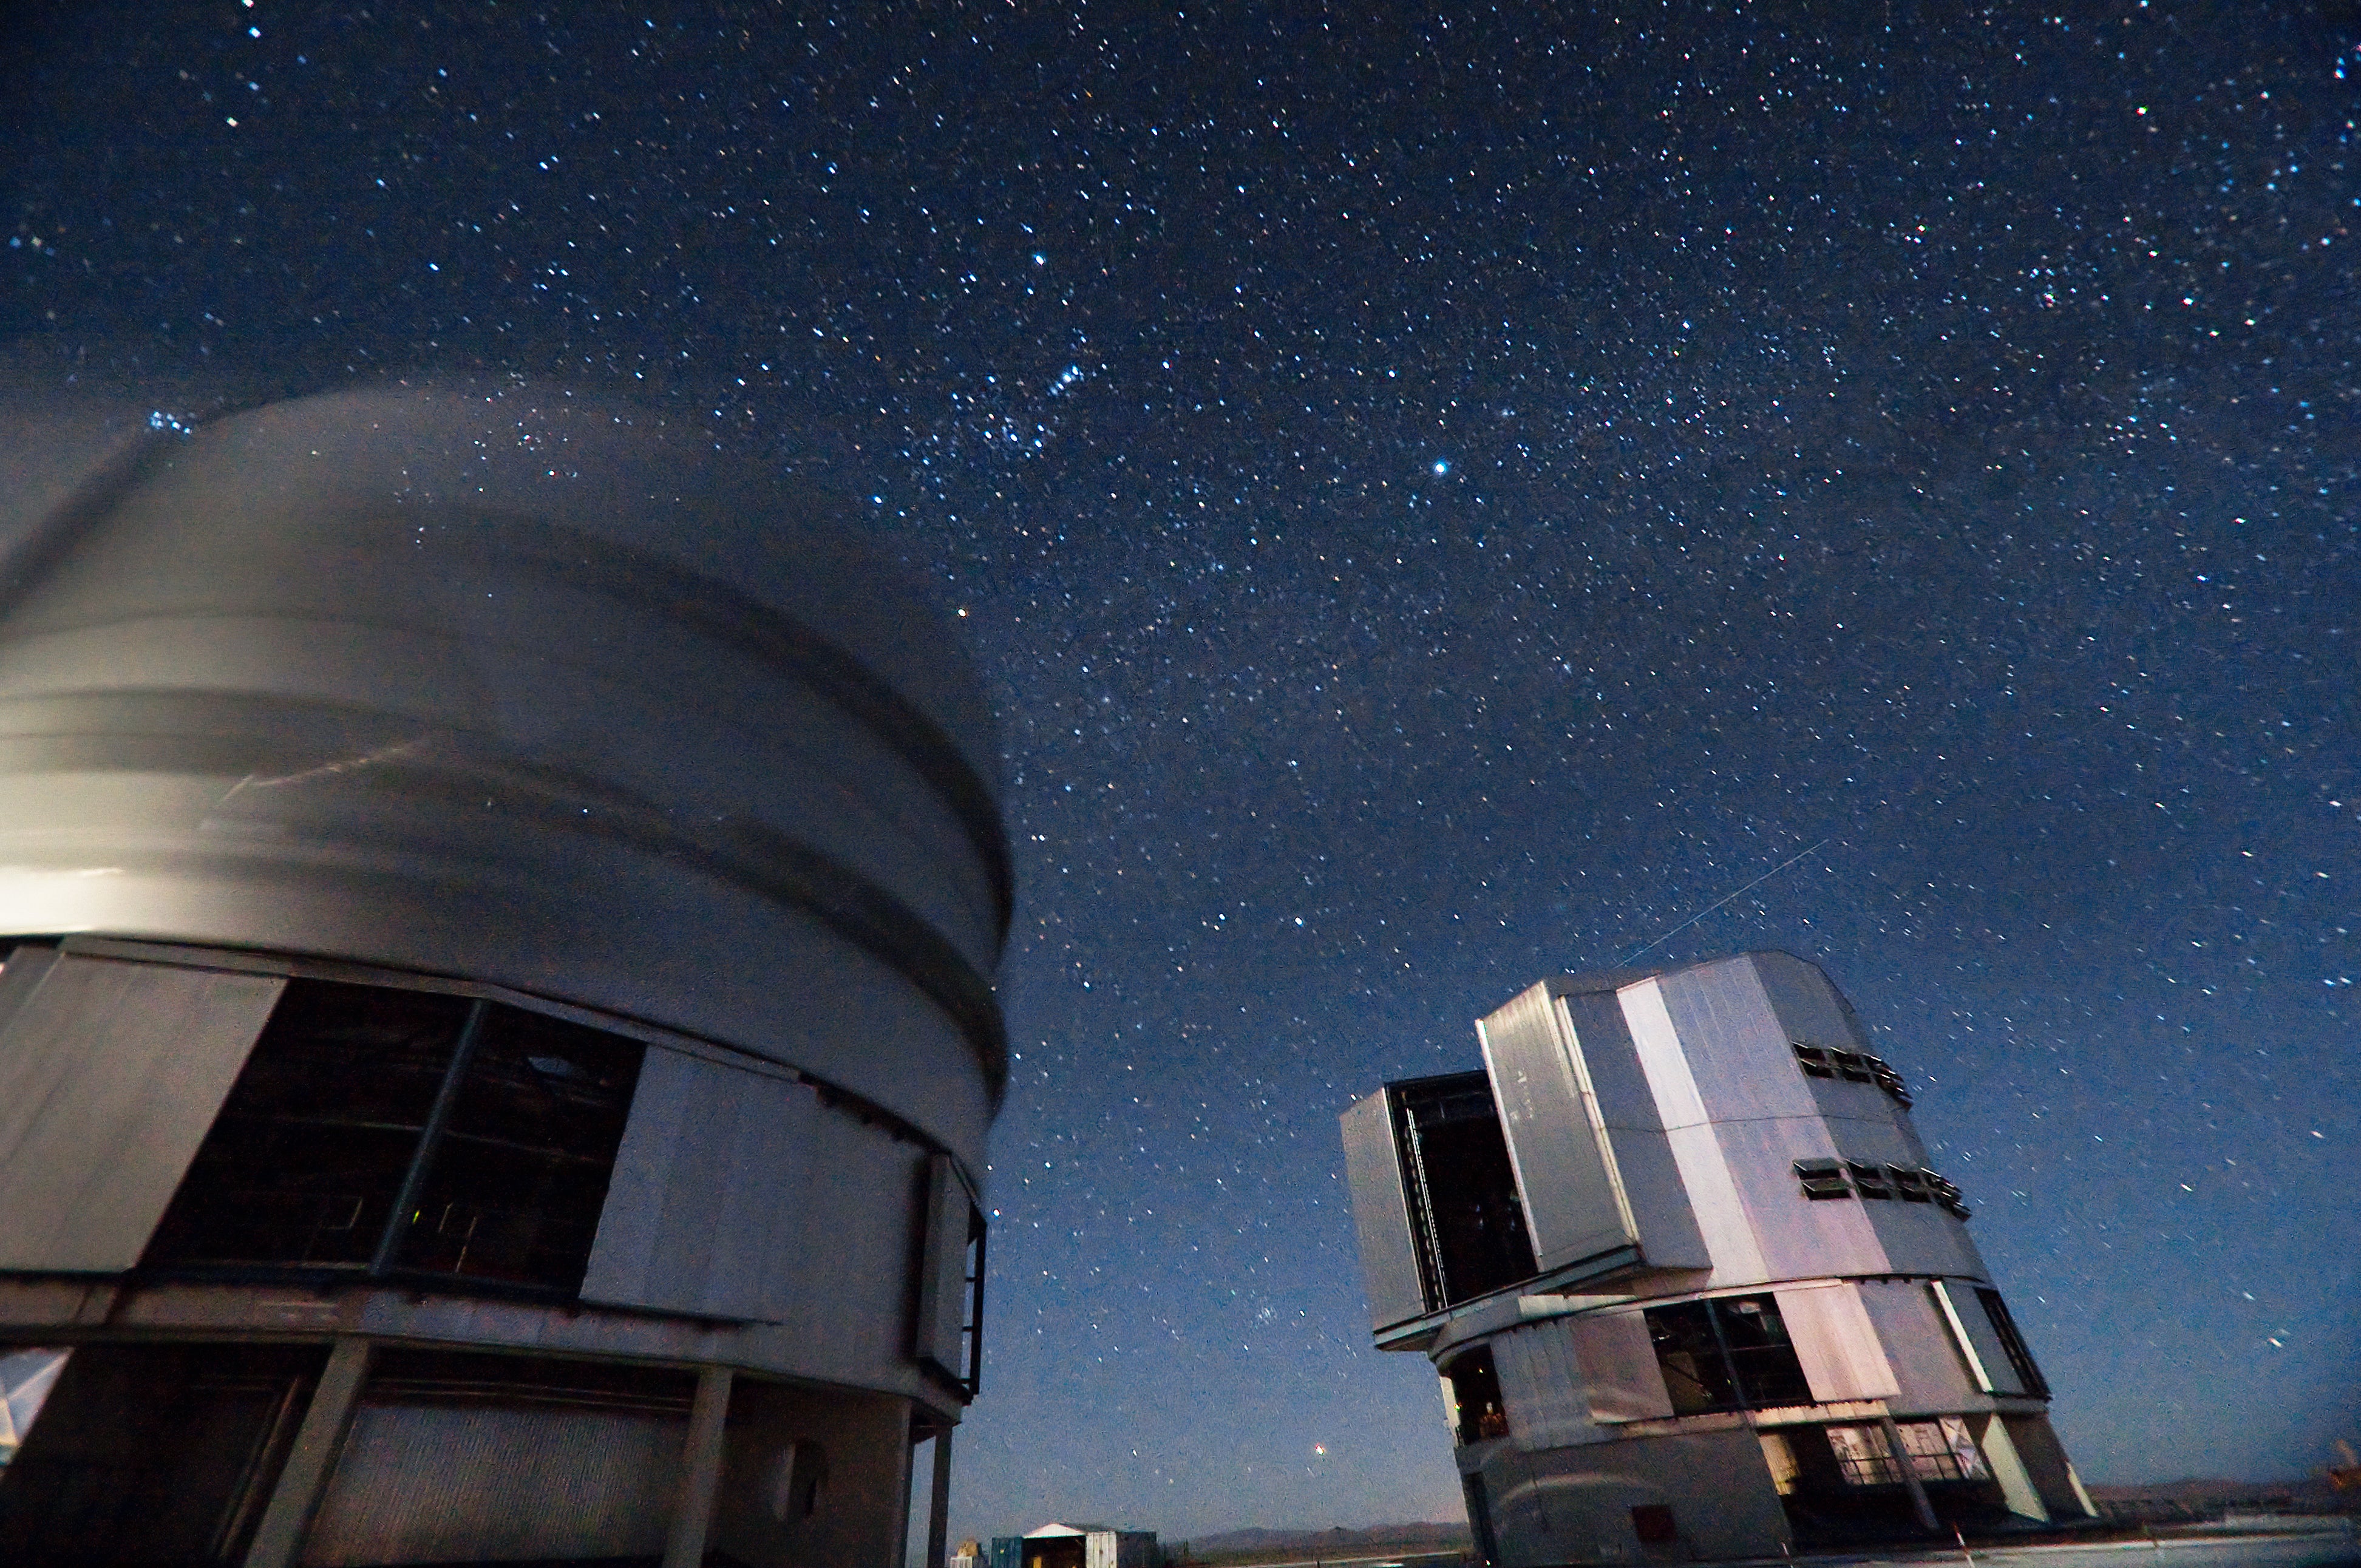 Southern Observatory’s Very Large Telescope (VLT) atop Cerro Paranal in Chile